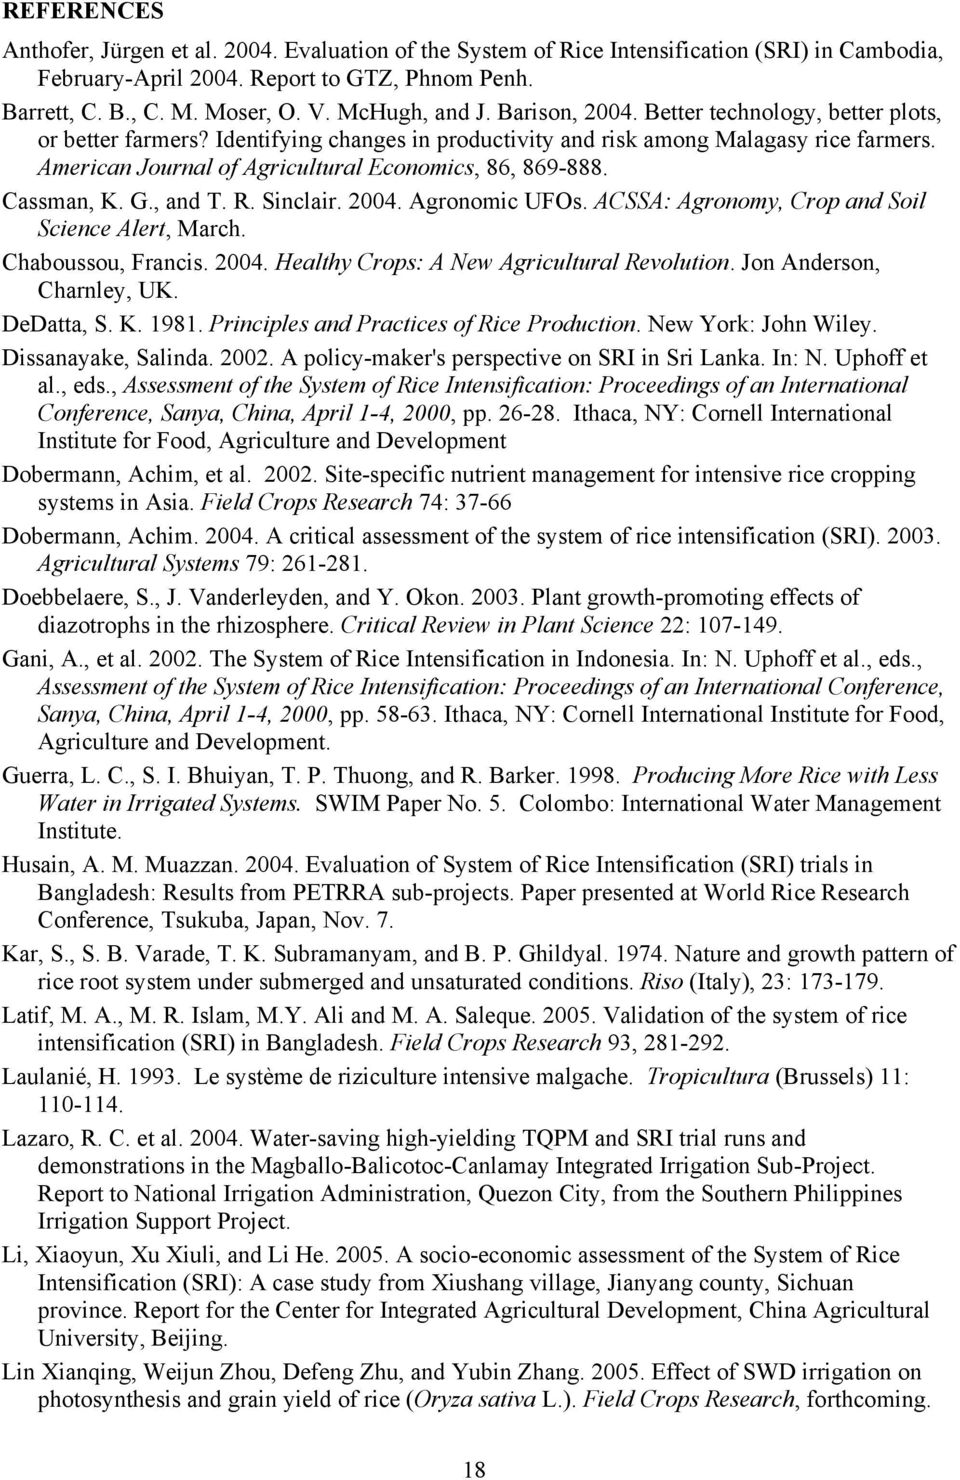 American Journal of Agricultural Economics, 86, 869-888. Cassman, K. G., and T. R. Sinclair. 2004. Agronomic UFOs. ACSSA: Agronomy, Crop and Soil Science Alert, March. Chaboussou, Francis. 2004. Healthy Crops: A New Agricultural Revolution.